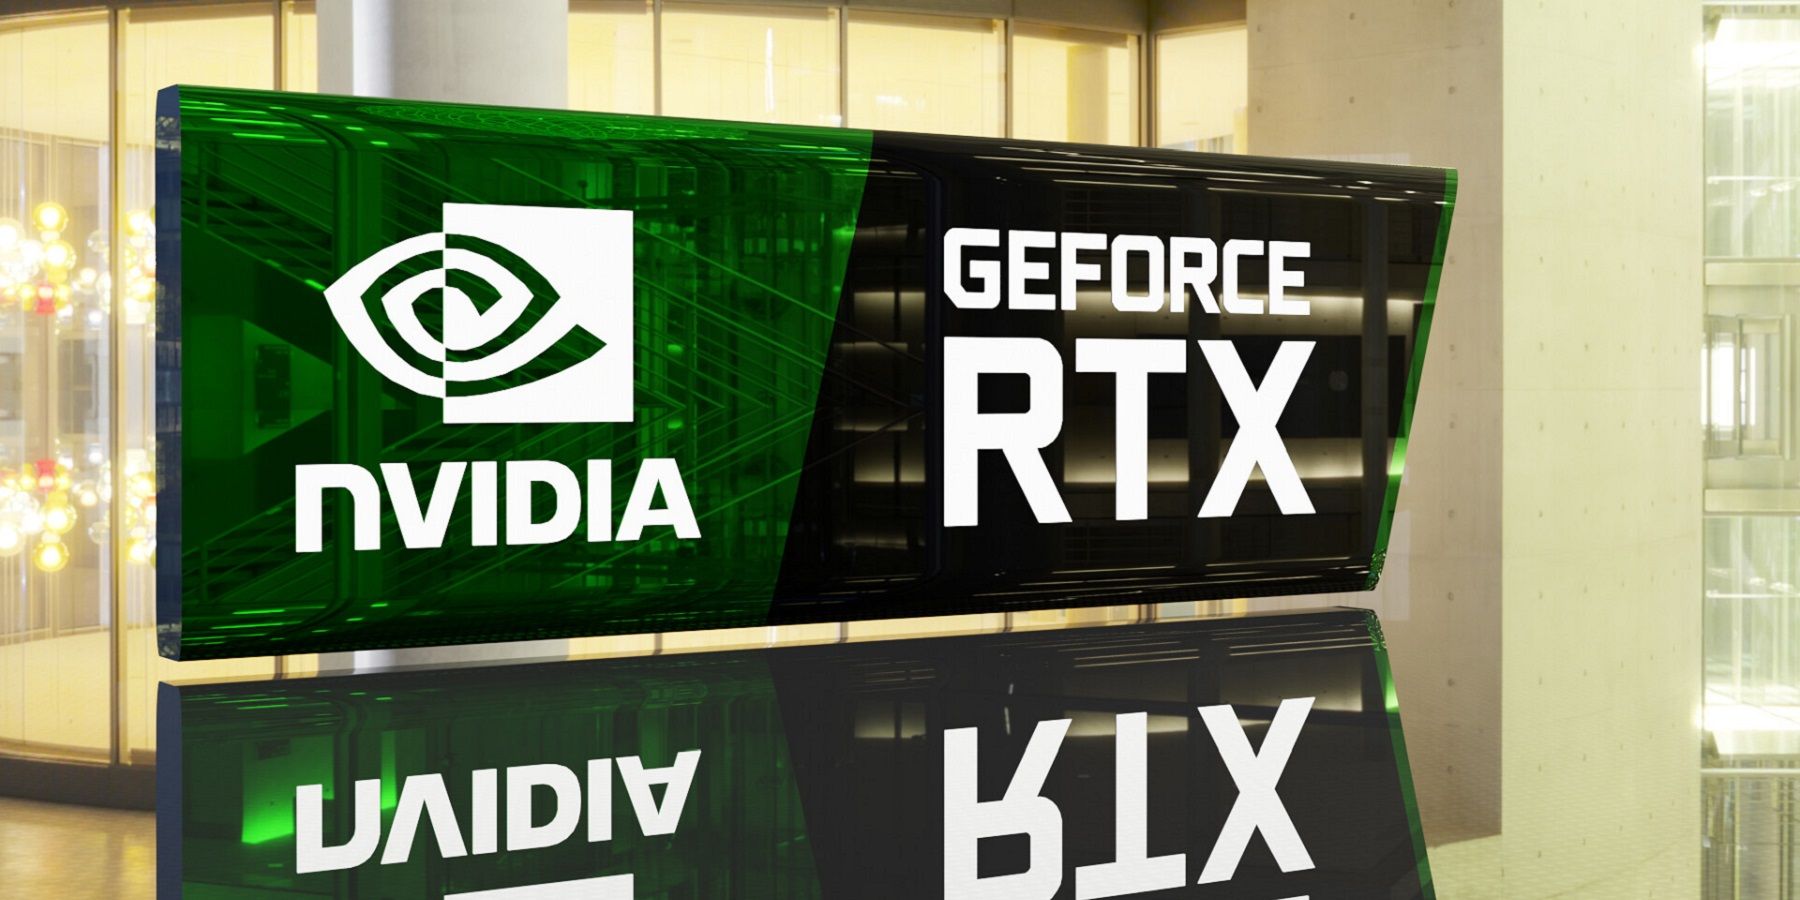 An image of the Nvidia Geforce RTX logo on a highly polished surface.